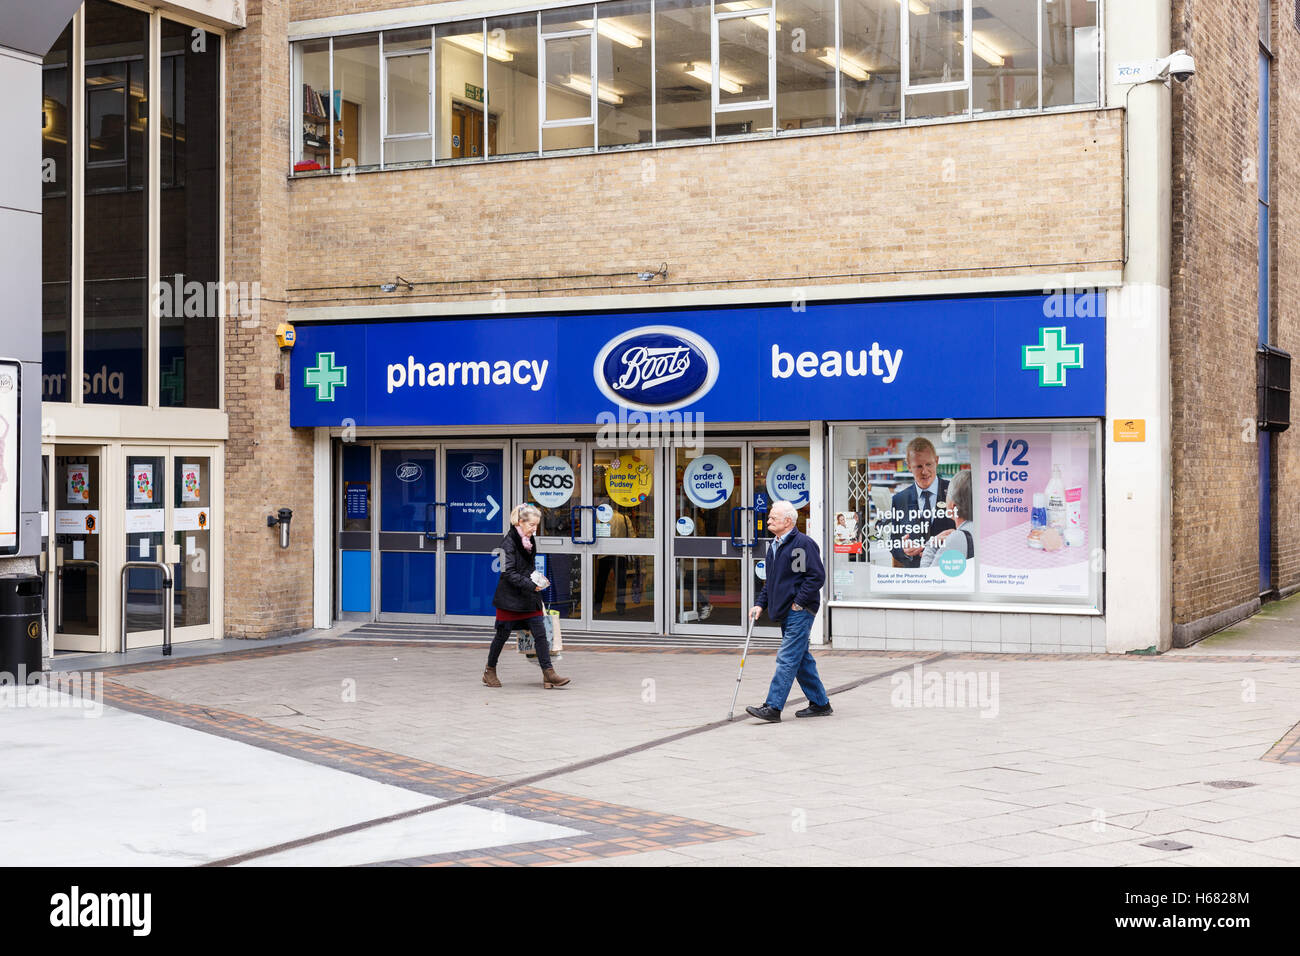 Boots Pharmacy Front High Resolution Stock Photography and Images - Alamy